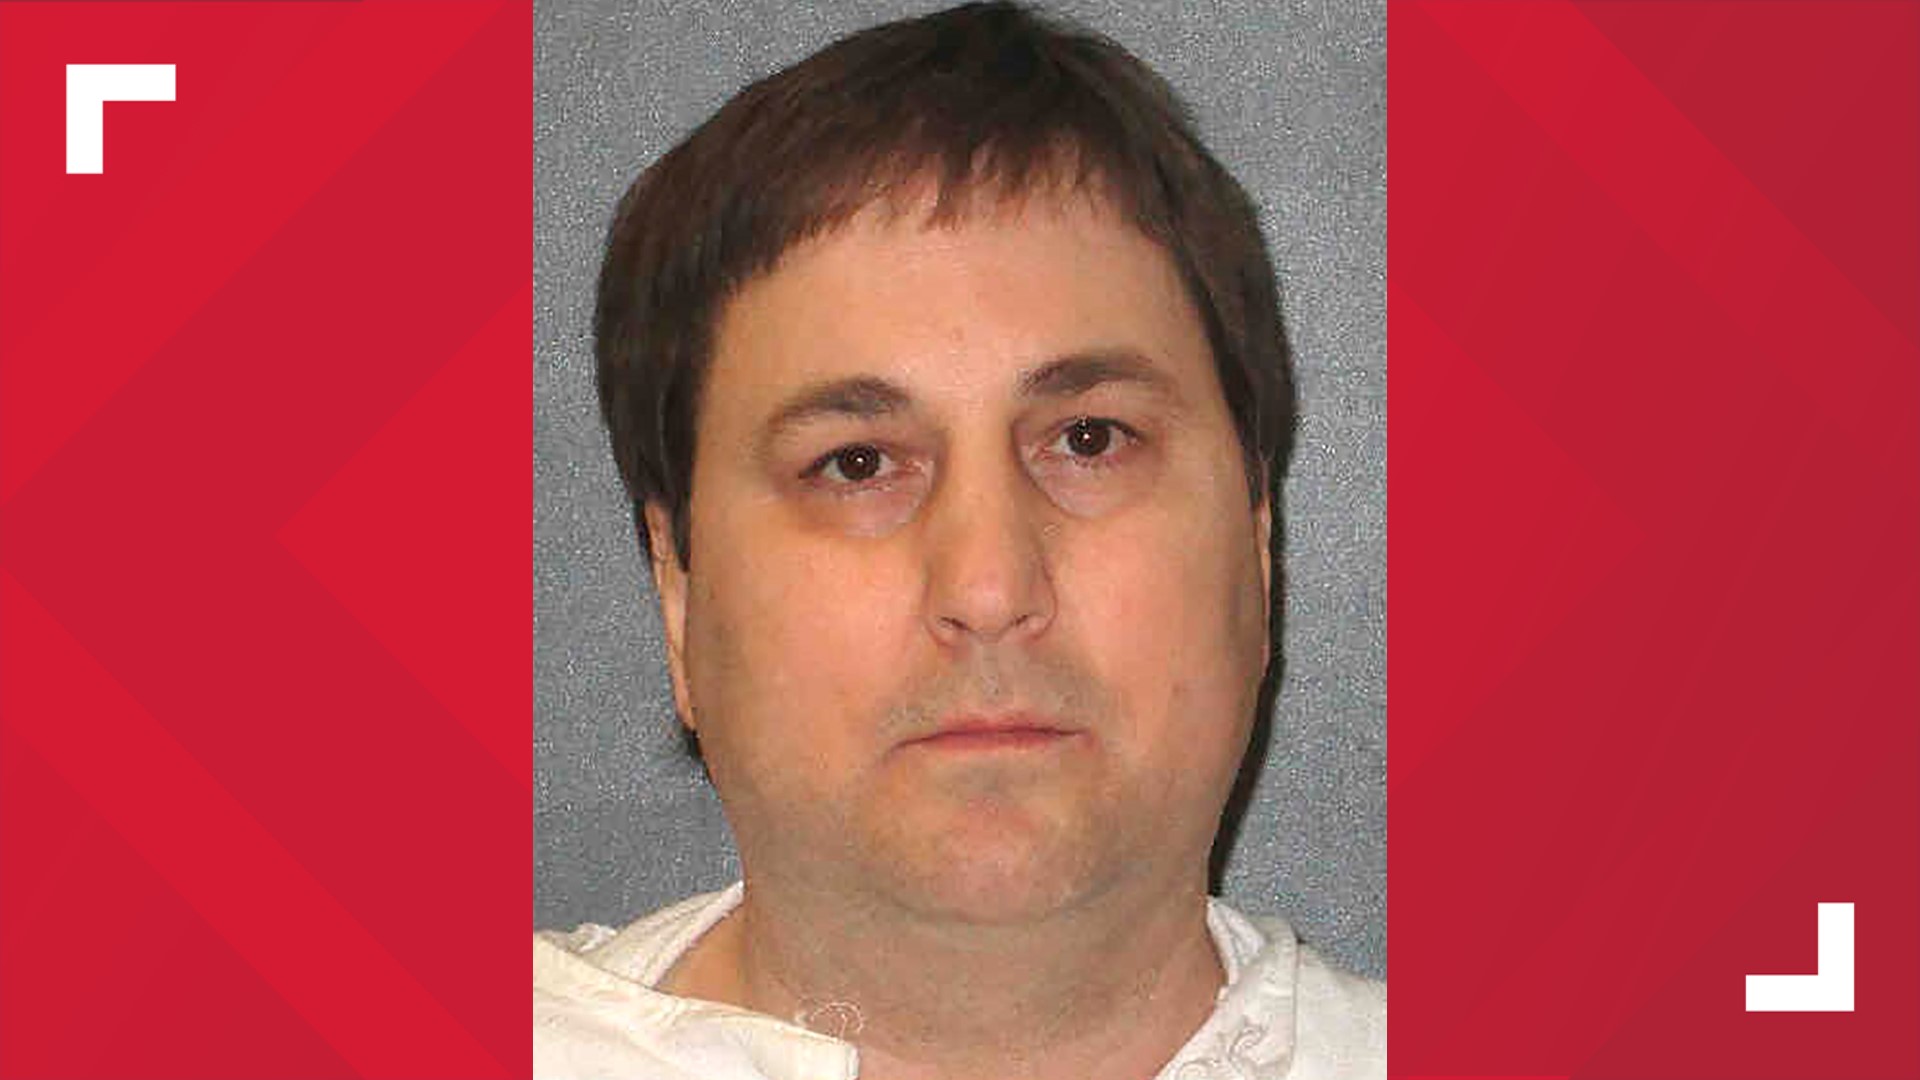 Stephen Barbee, 55, received a lethal injection at the state penitentiary in Huntsville at 7:35 p.m.